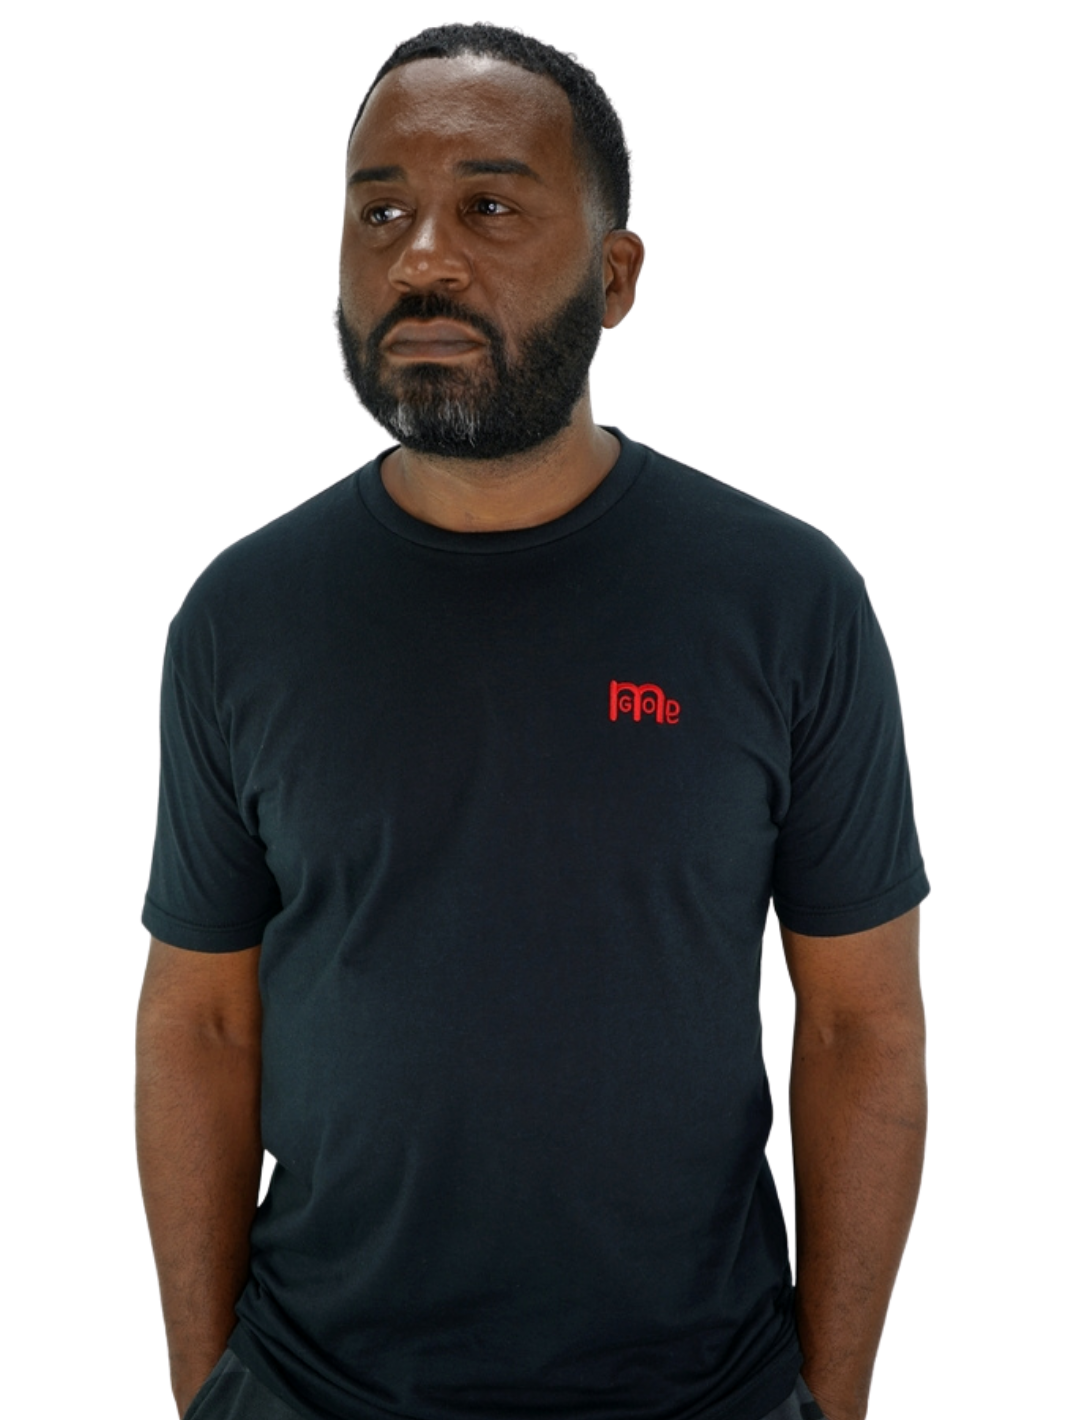 Lightweight softness for all-day comfort and the bold Red GODinme logo to represent GOD's Goodness, this Black GODinme T-Shirt is made for you: the GOD in you.